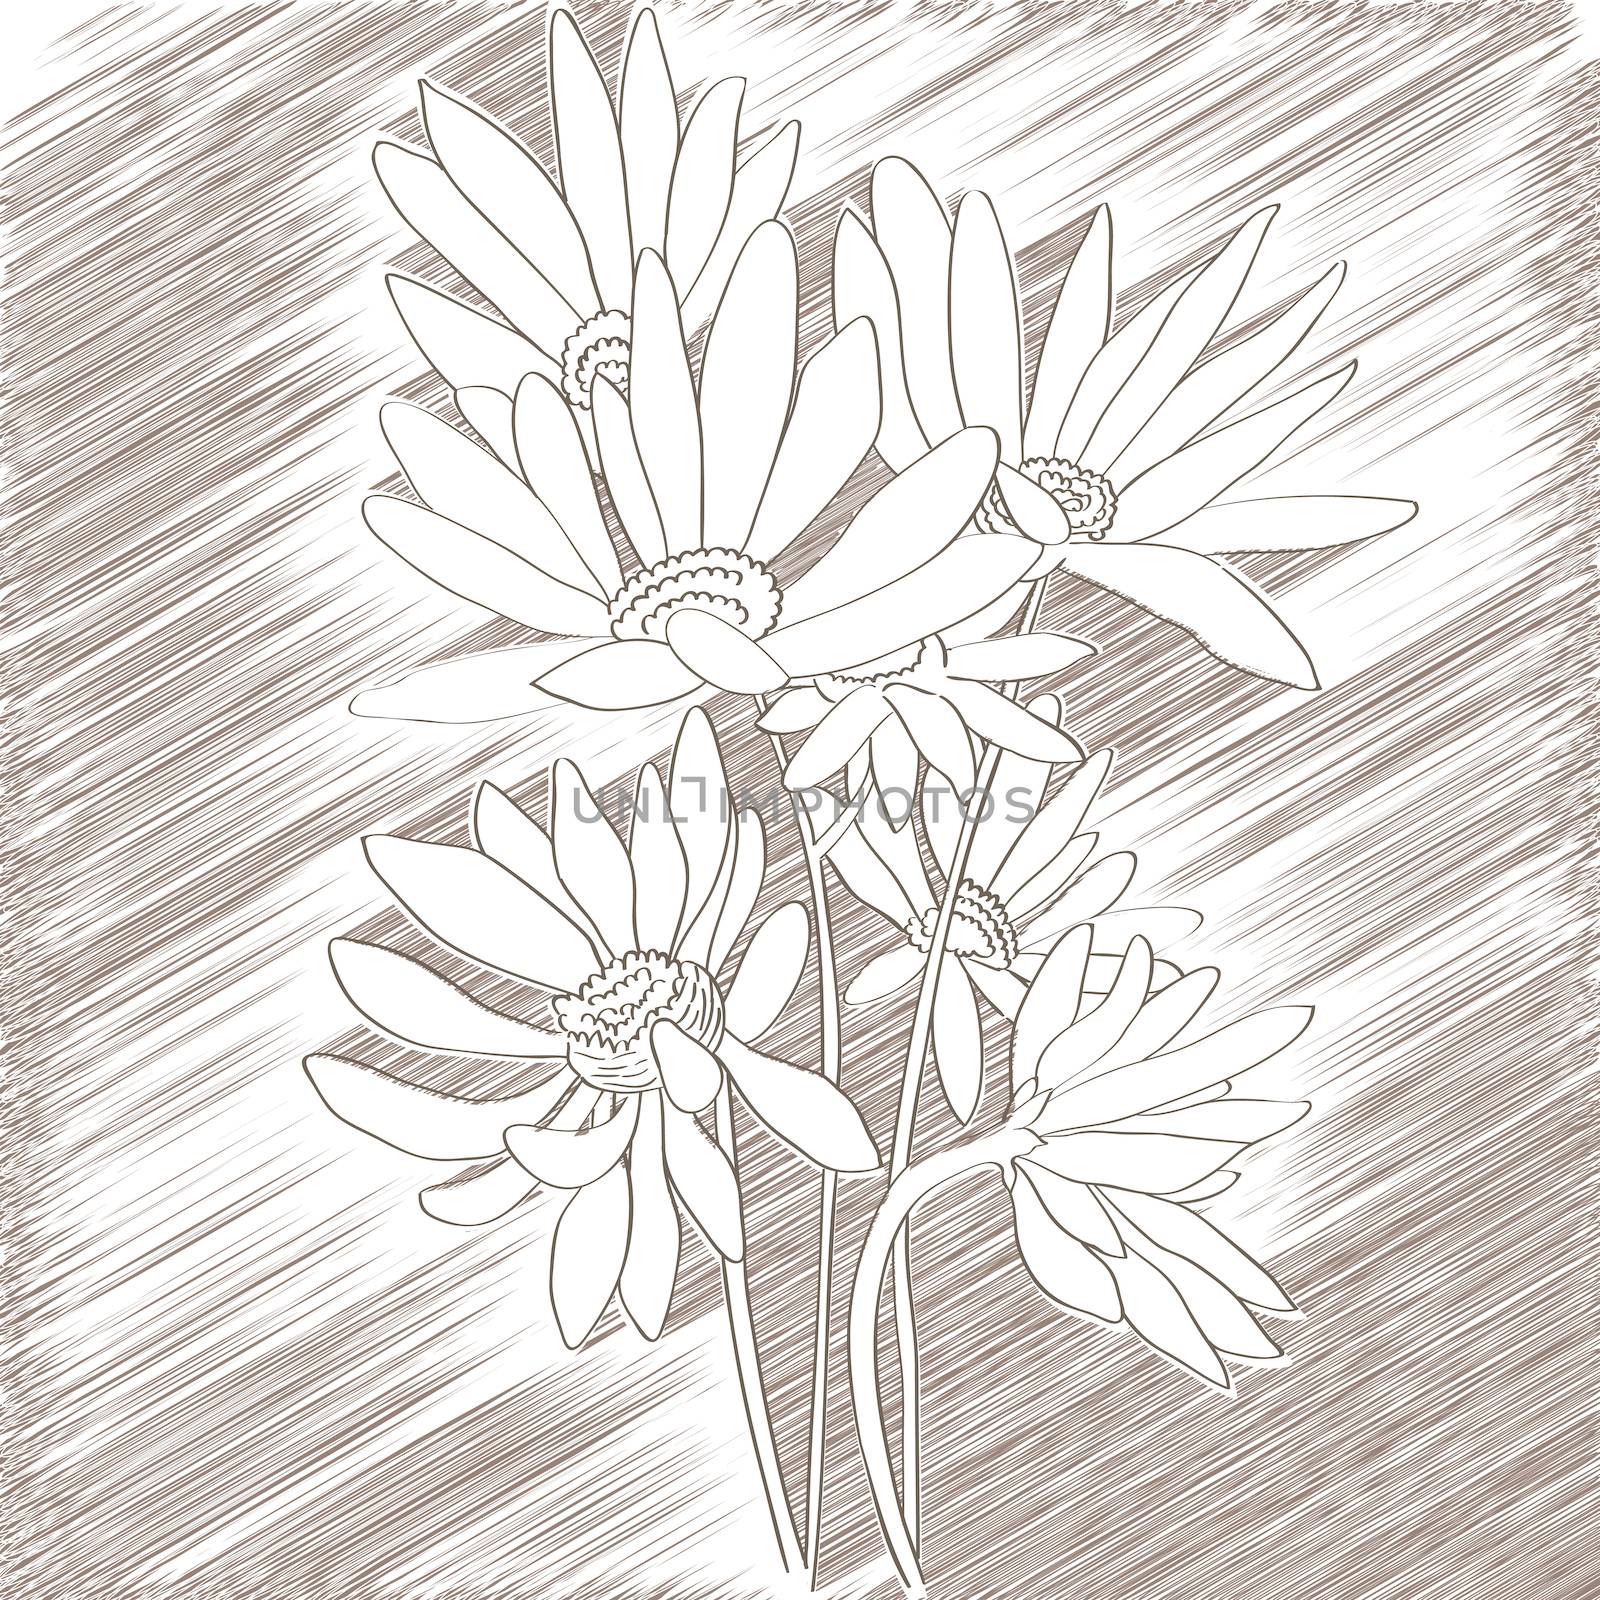 Hand drawn illustration of a greeting card with daisies, graphic sketch over textured background